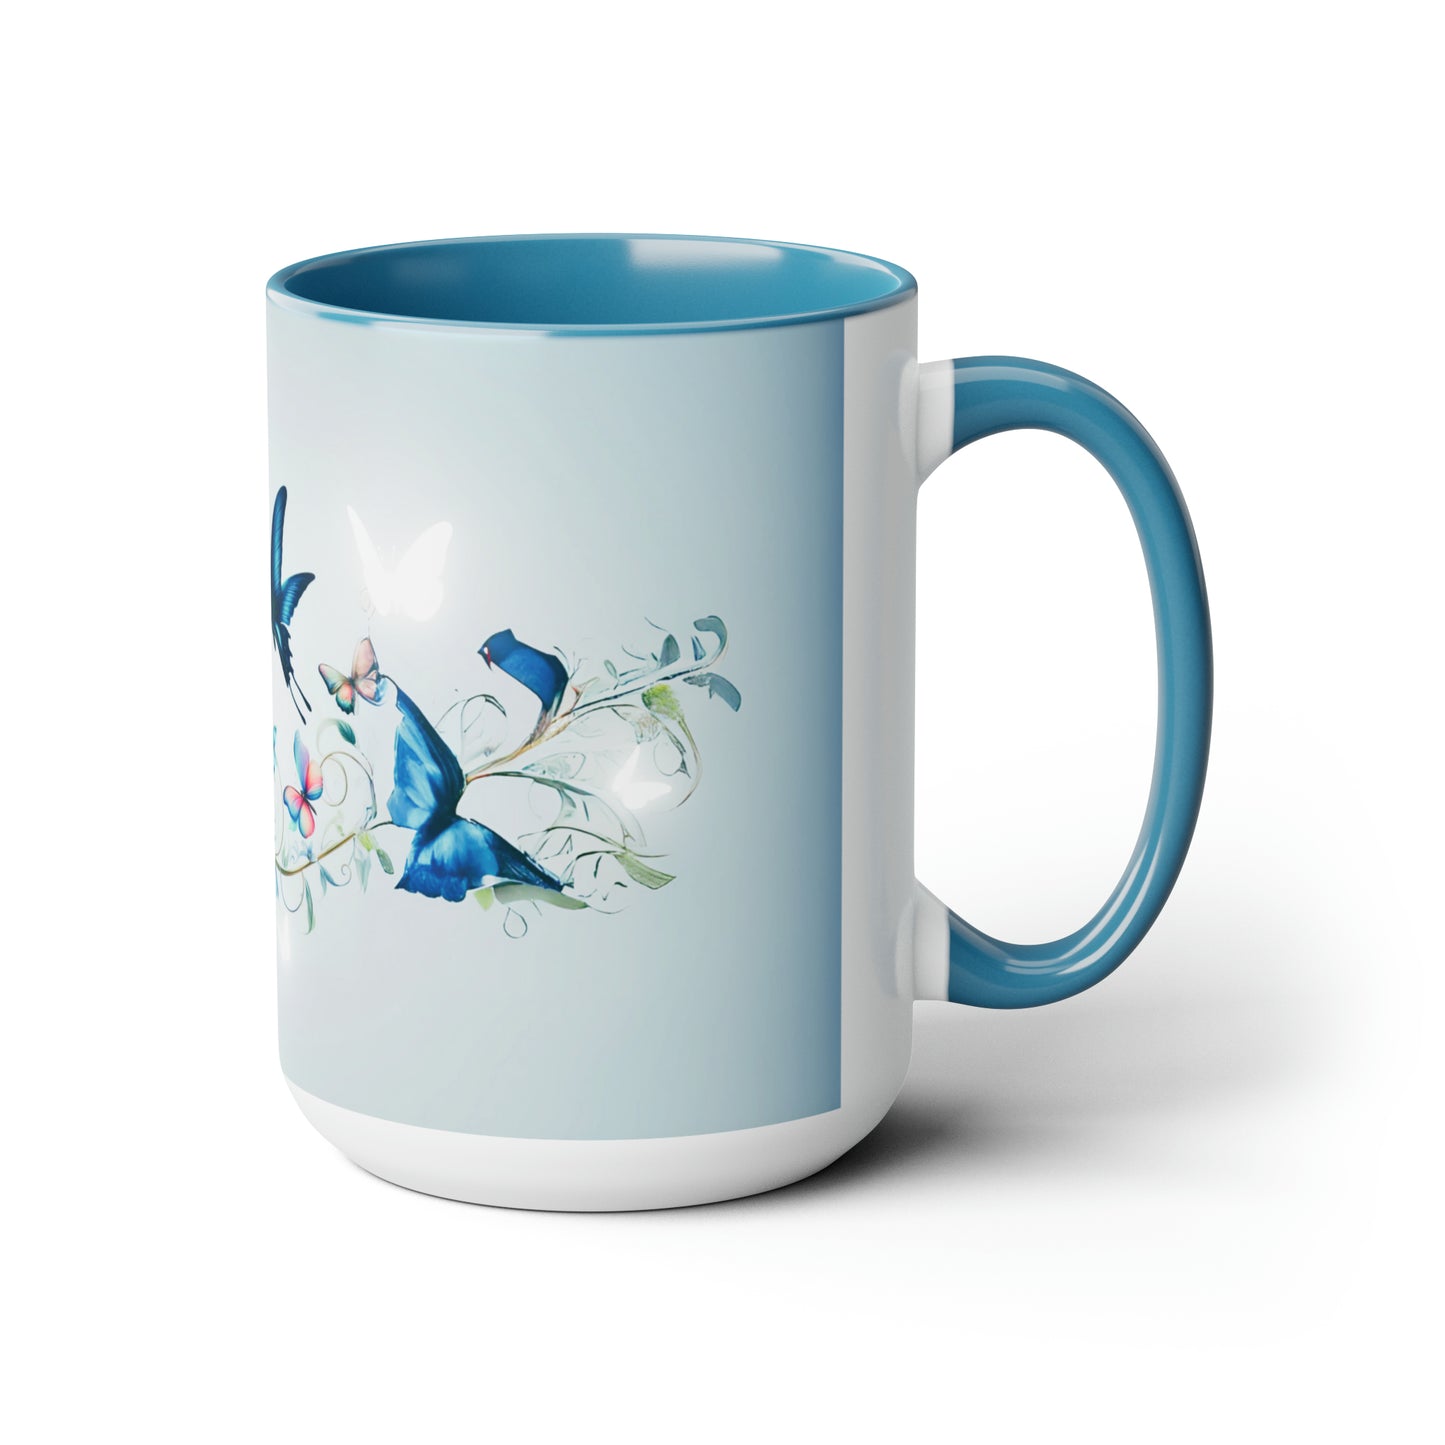 Blue Butterflies, with vines and flowers 15oz White Mug with Blue Color Accents Dishwasher and Microwave Safe Two-Tone Coffee Mugs